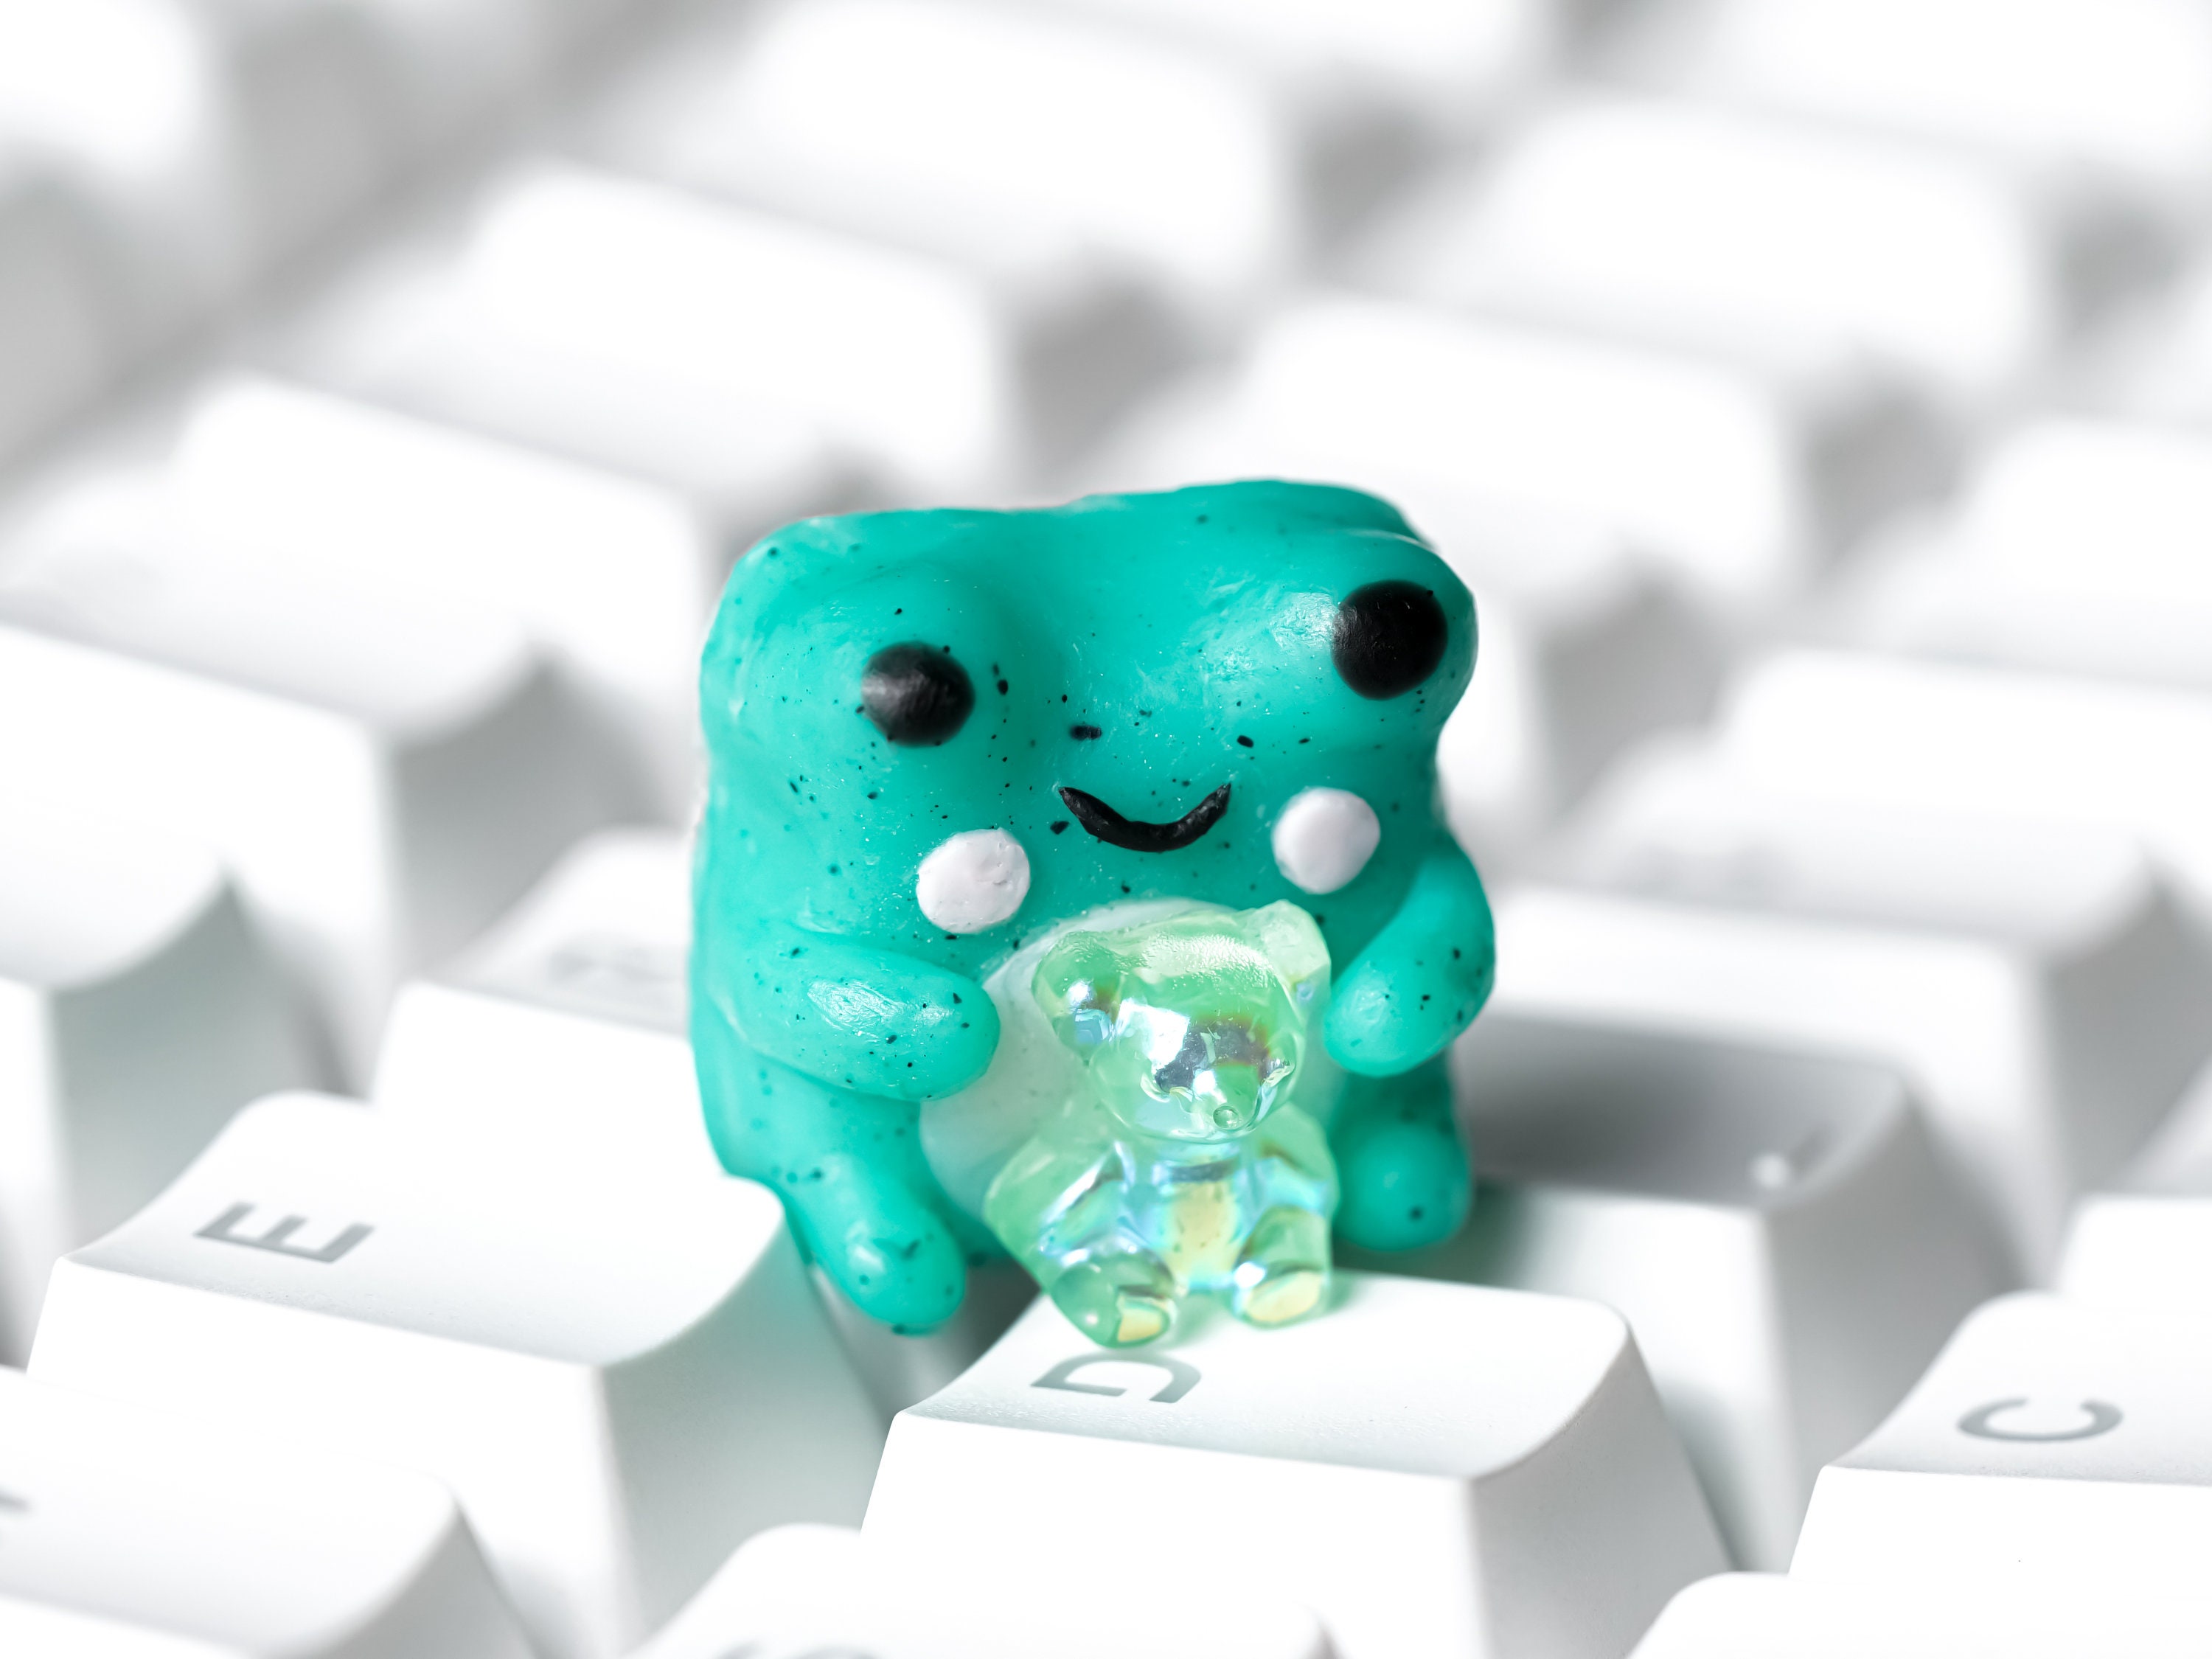 Froggy Keycap, Funny Keycap, Artisan Keycap, Keycap for MX Cherry Switches Michanical Keyboard, Handmade Gift